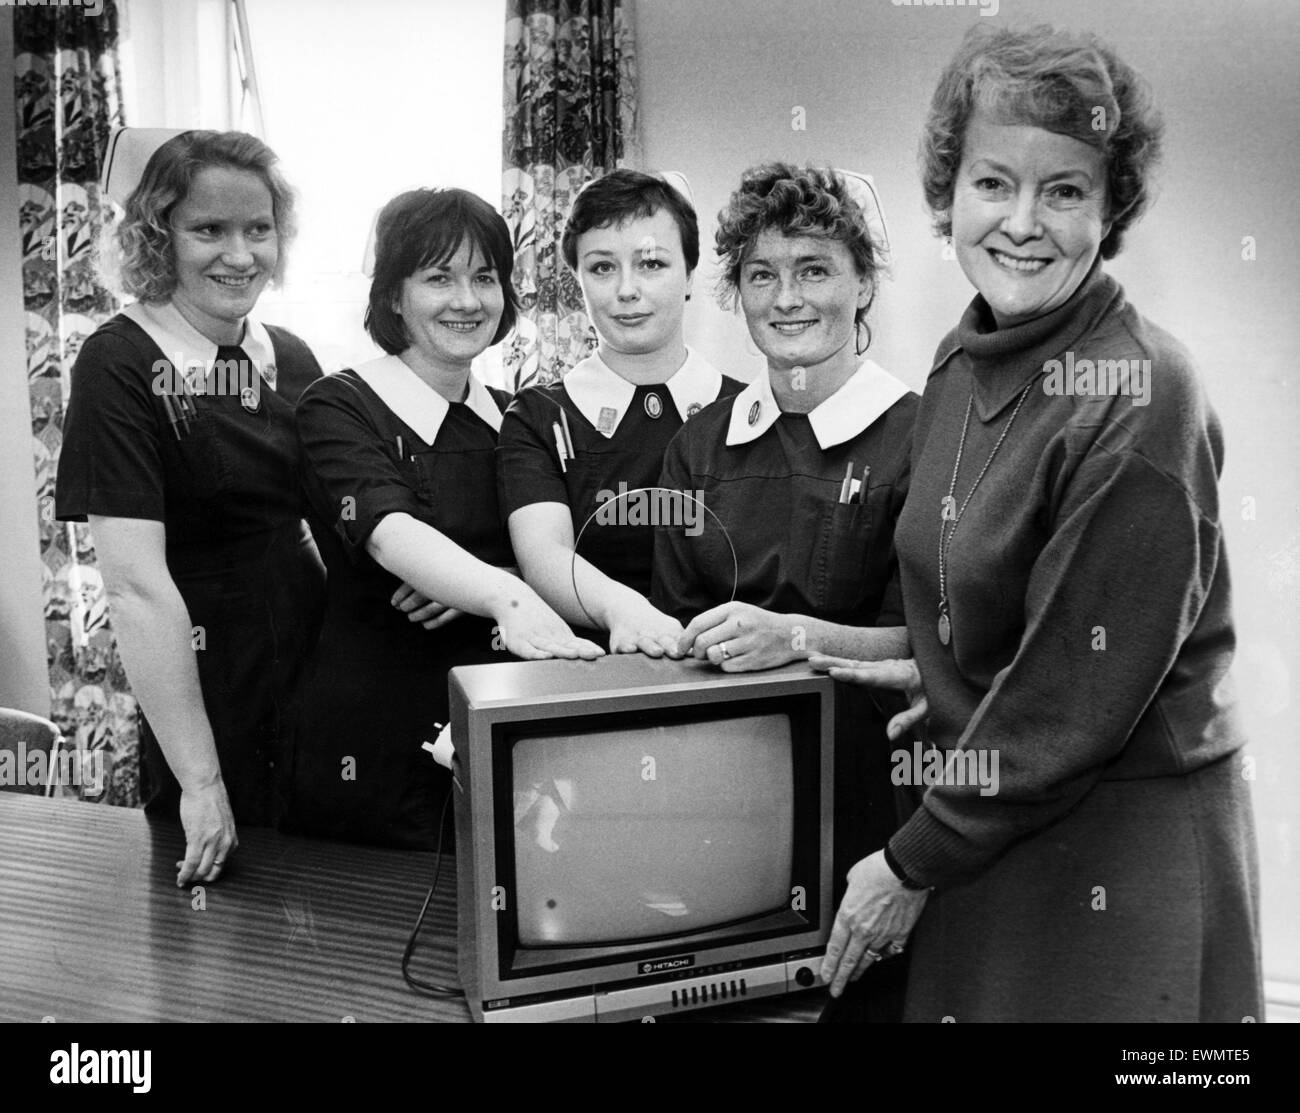 Expectant mums need never miss an episode of Dallas or Dynasty thanks to the generosity of a hospital charity group. Five colour television sets worth £900 were handed over to Middlesbrough Maternity Hospital by the League of Friends of the South Tees Mat Stock Photo